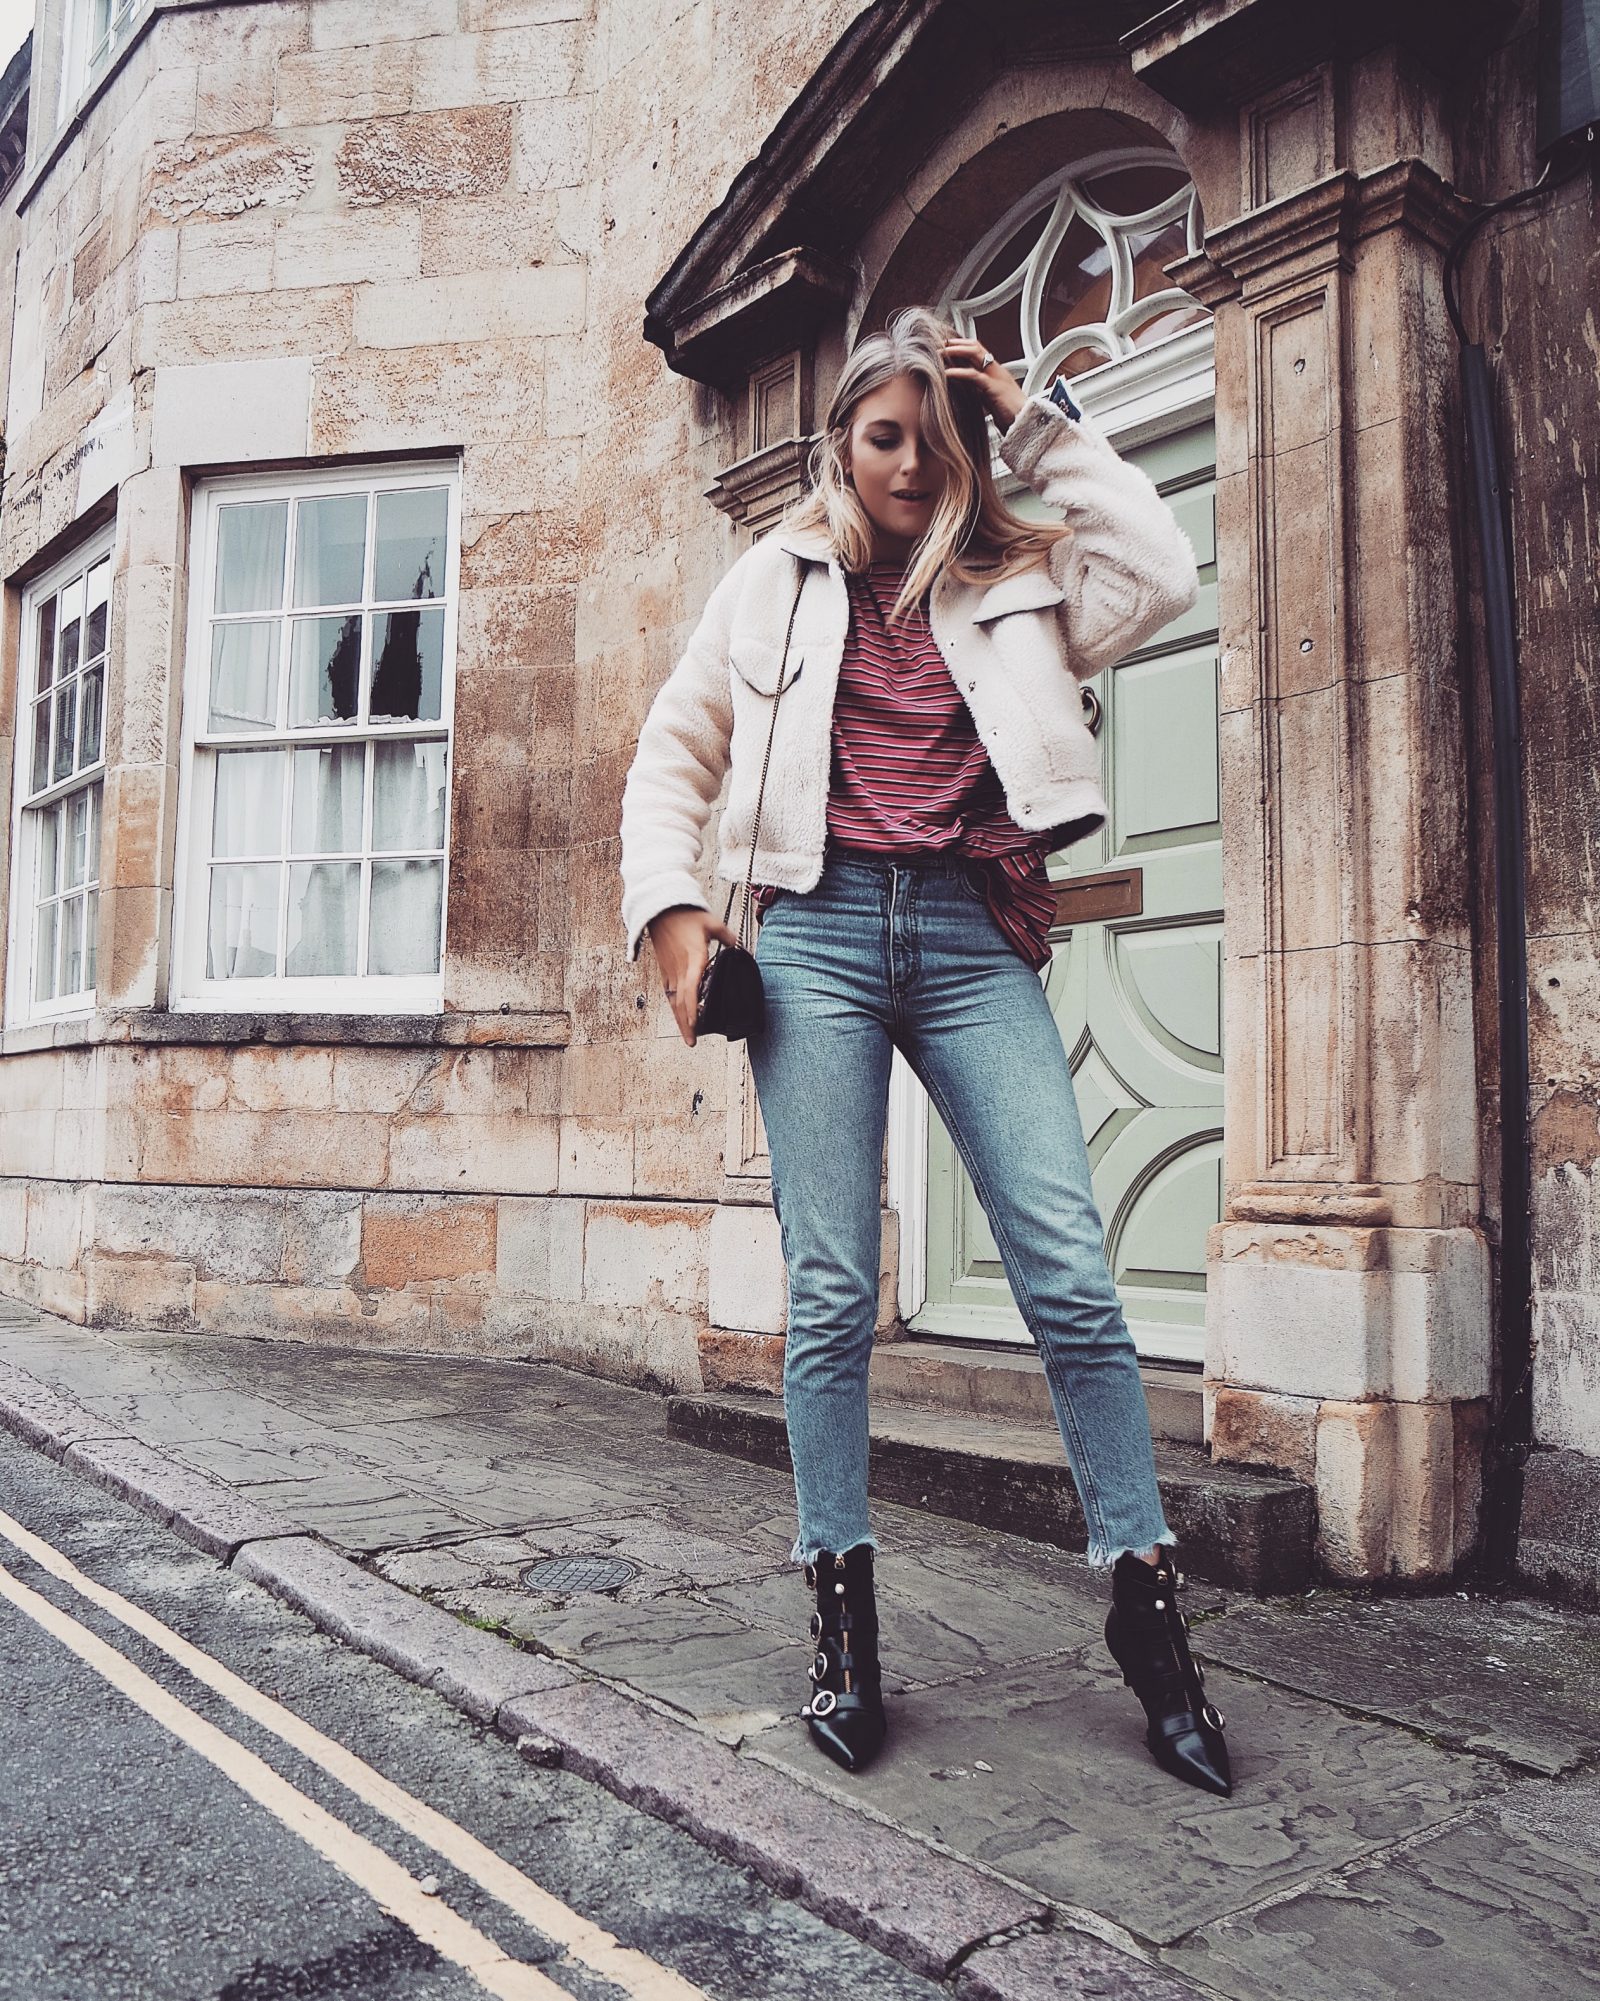 Buckle Boots - Autumn Outfit Inspiration 